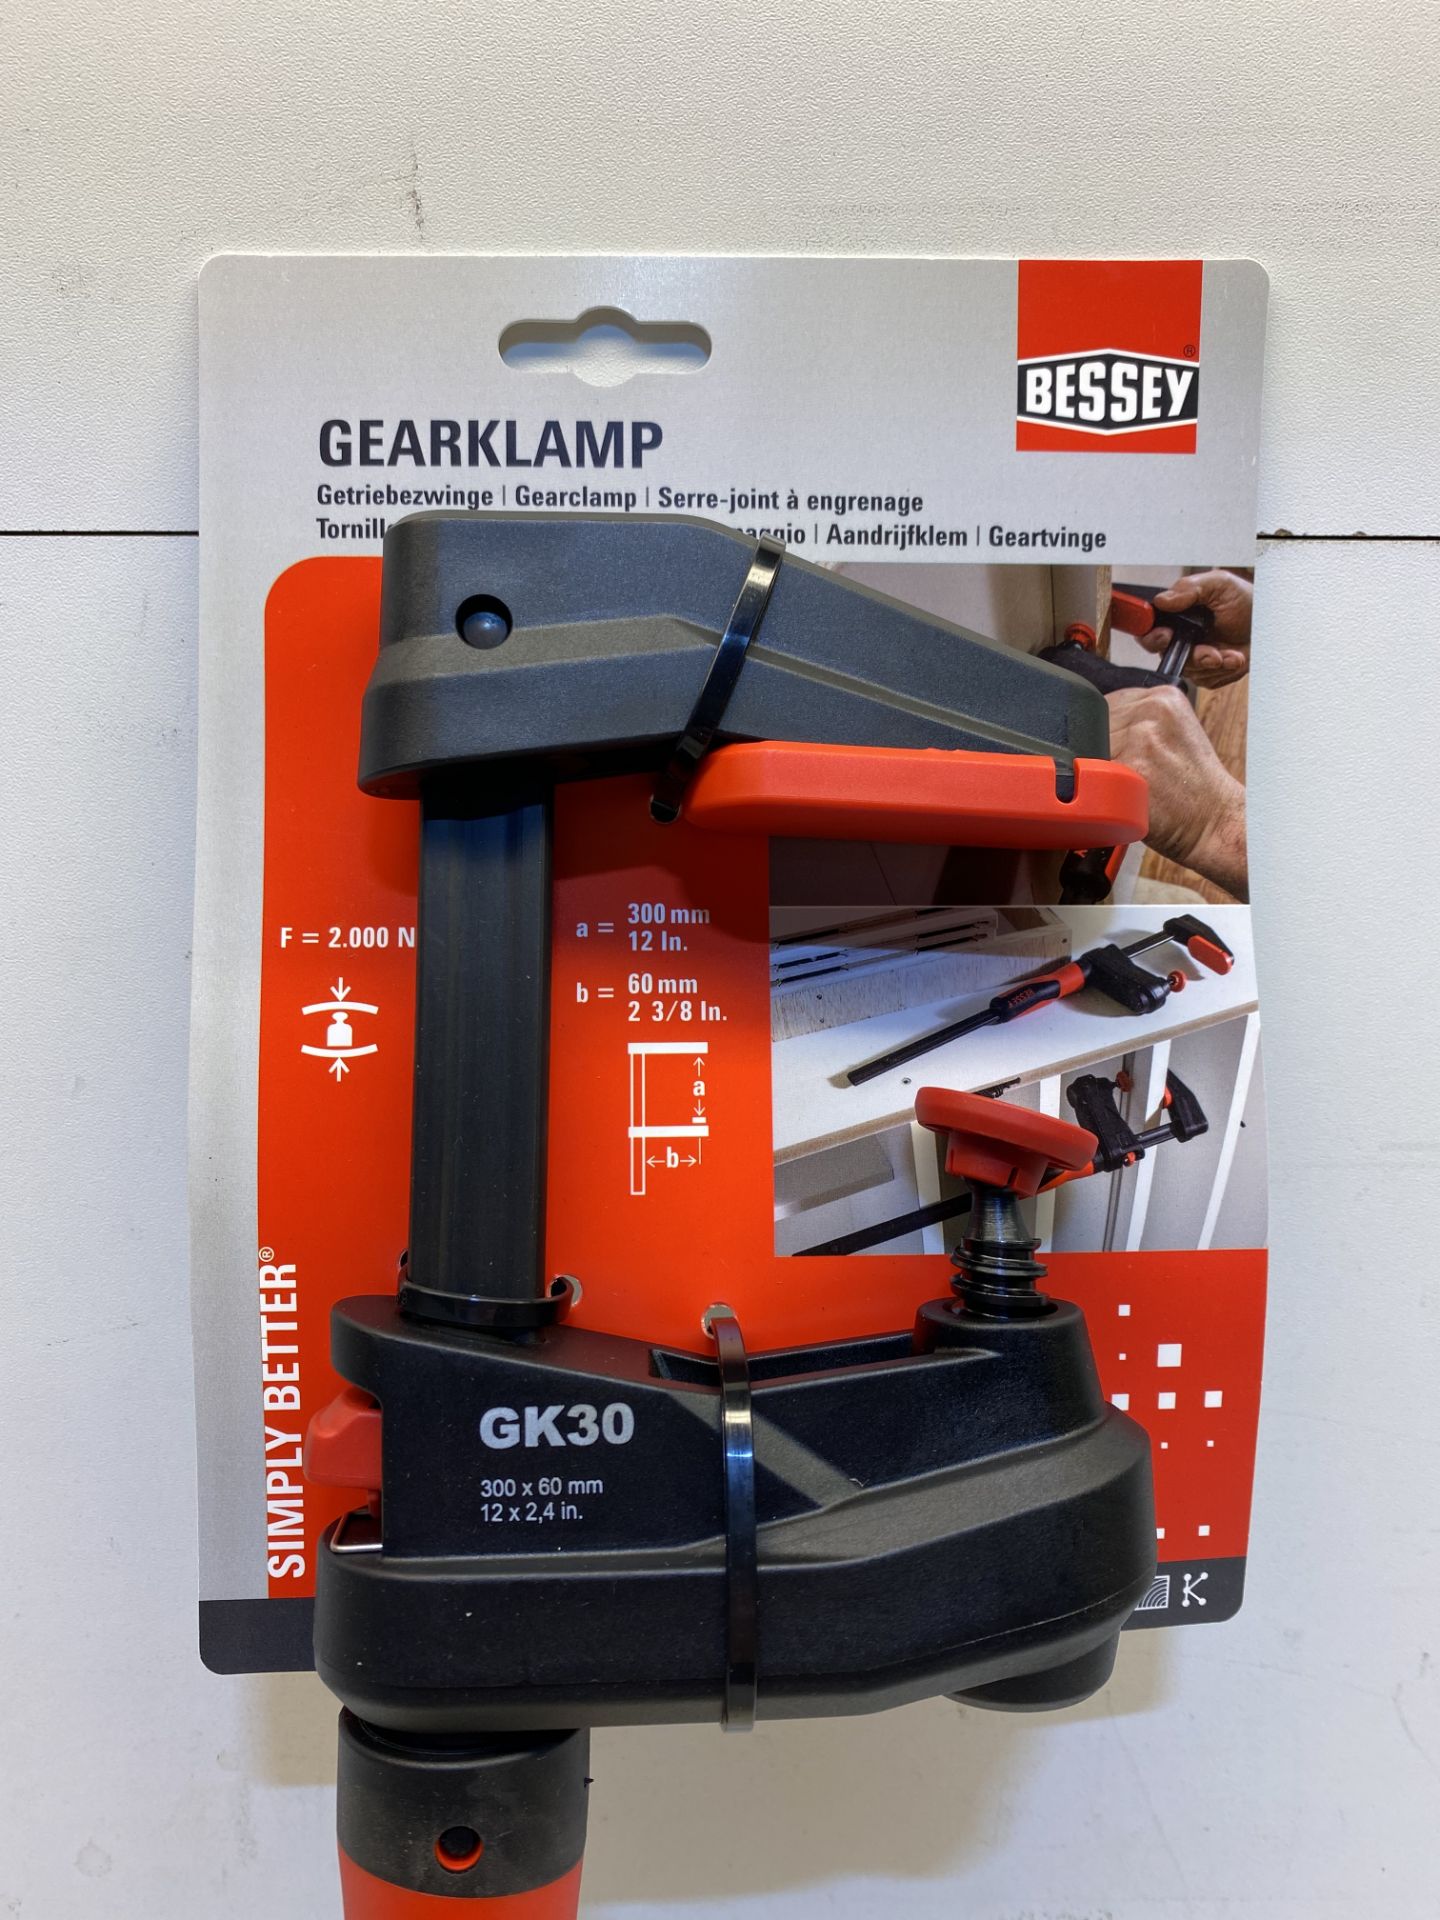 6 x Bessey GK30 300mm Gearclamp GK Transmission Clamp 300/60 - Image 2 of 2